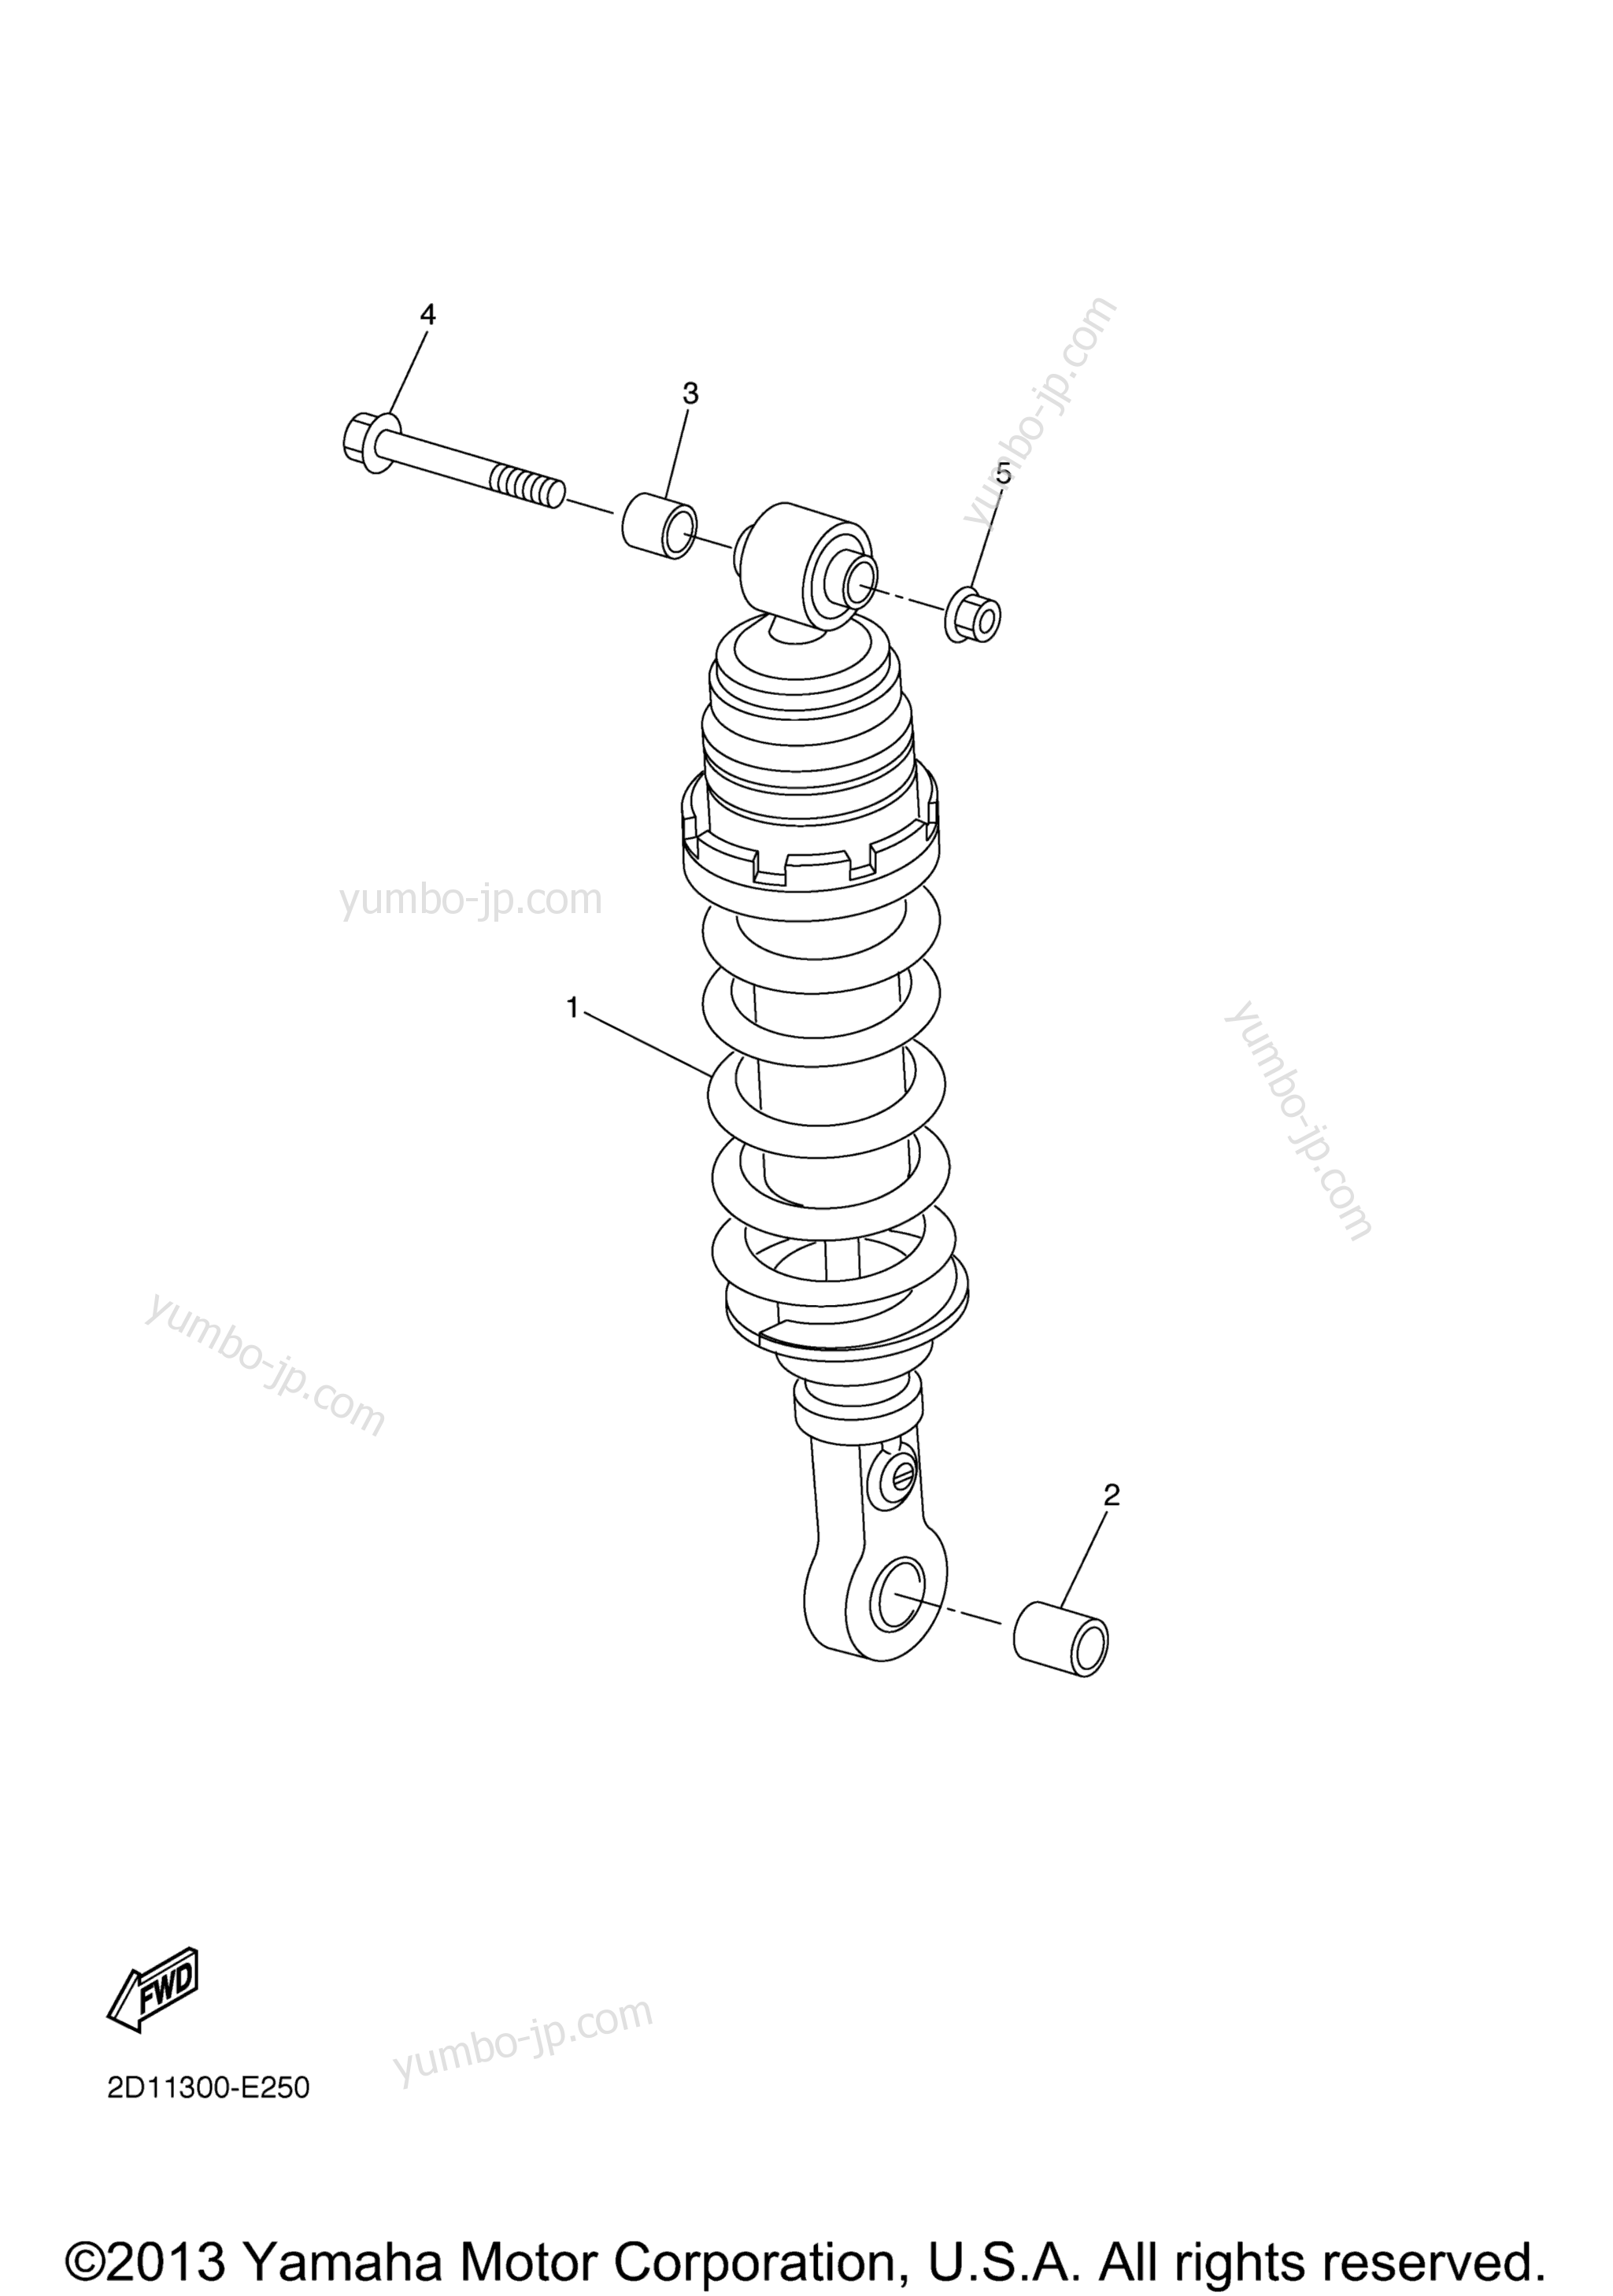 Rear Suspension for motorcycles YAMAHA FZ1 (FZS10W) 2007 year